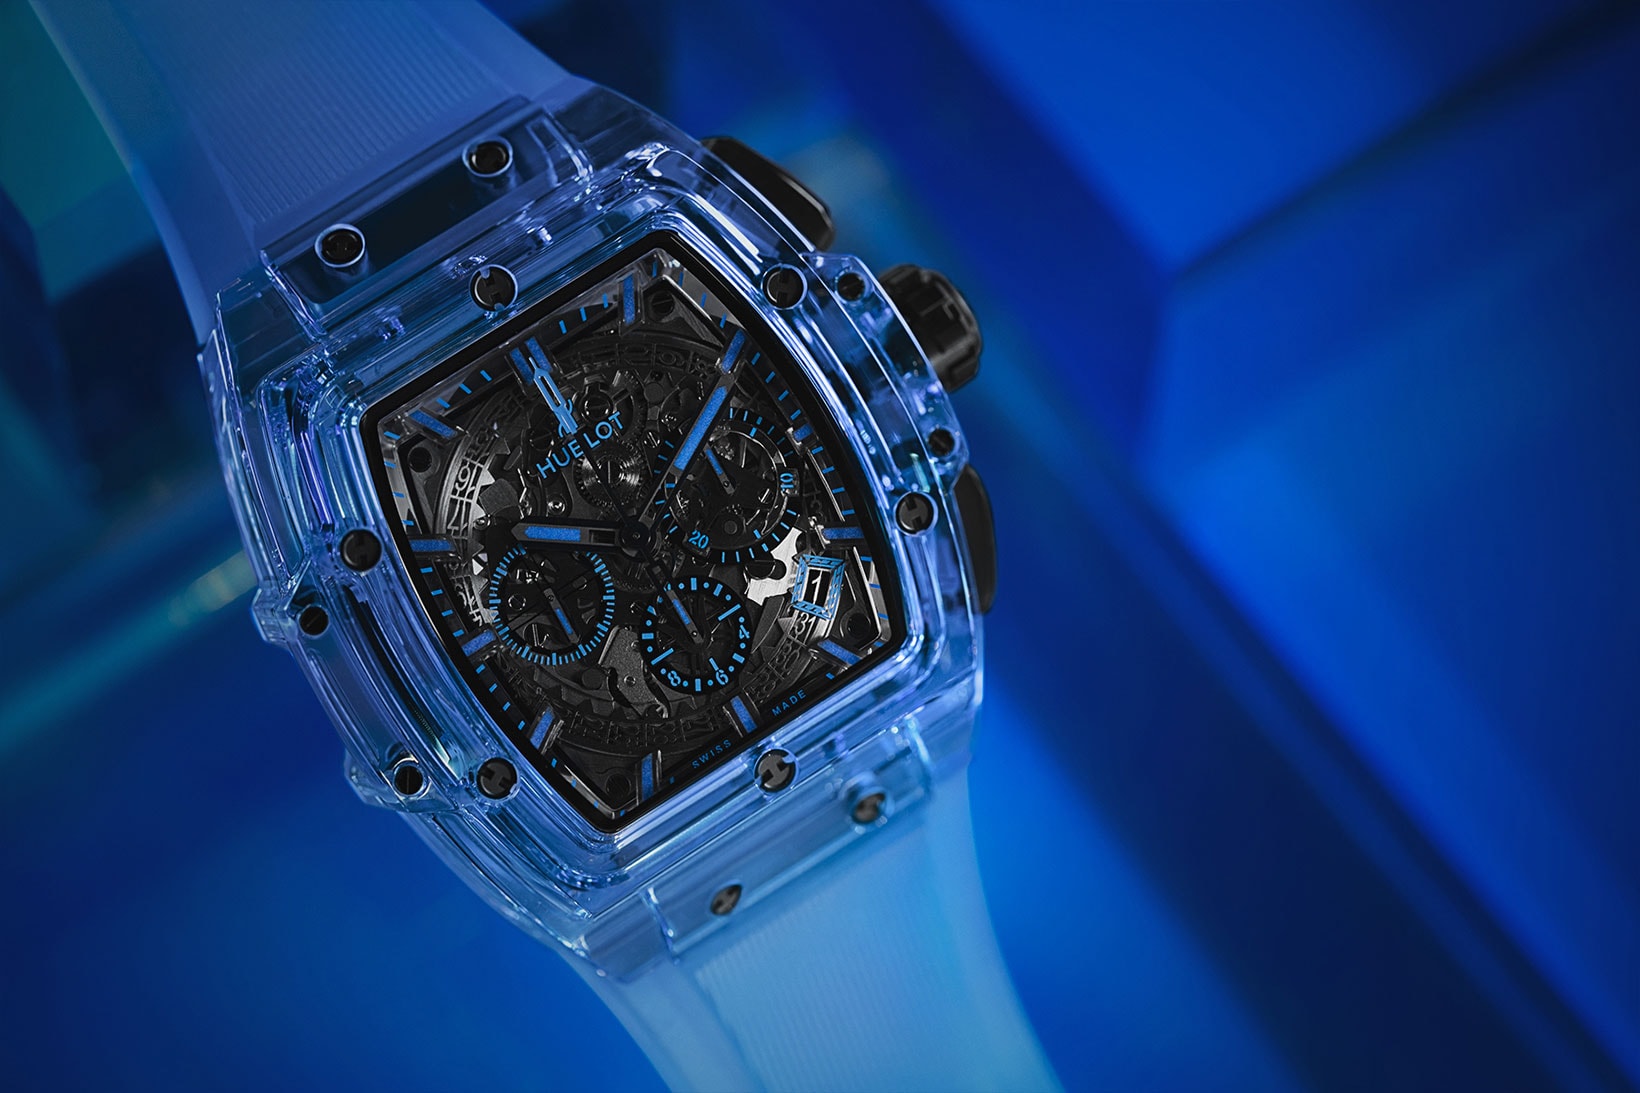 Hublot Launches World's First Yellow Sapphire Watch Timepieces Sapphire Spirit of Big Bang